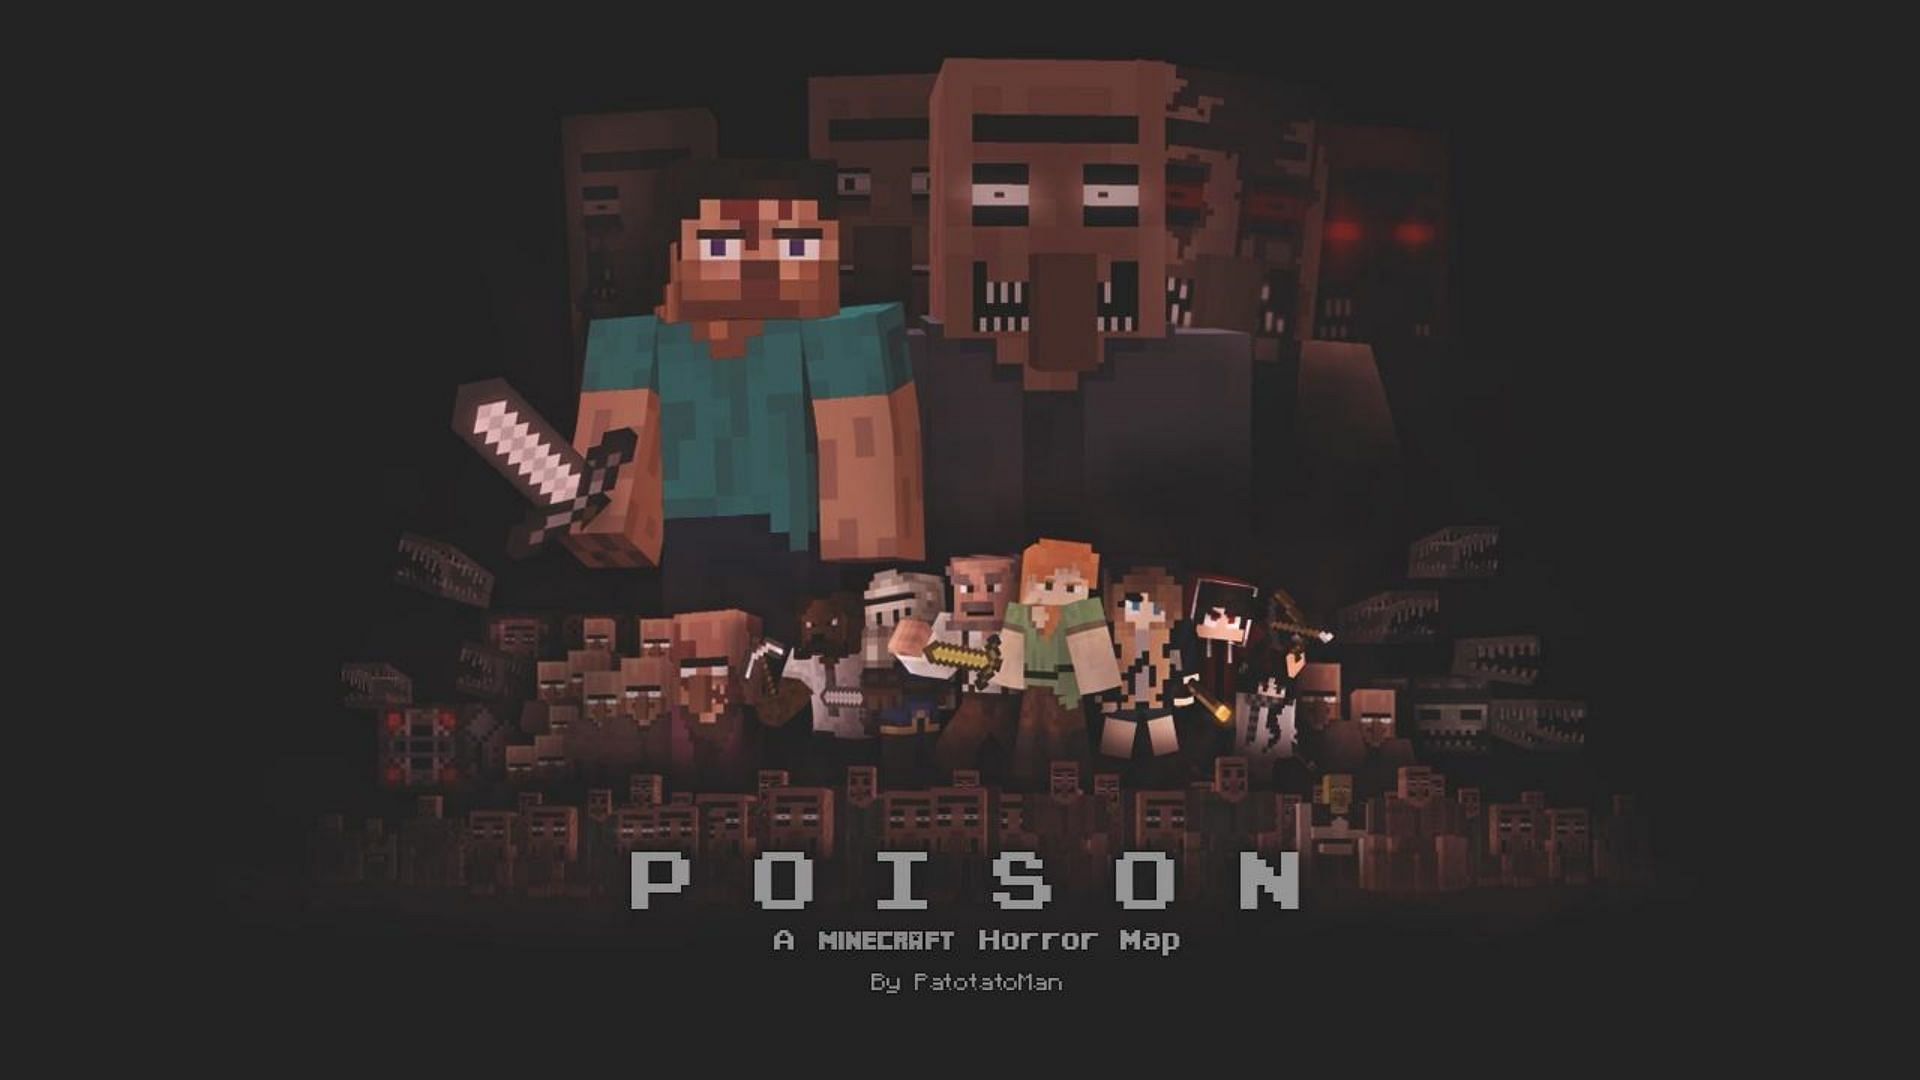 POISON 2.0 is one of the scariest custom maps for the game (Image via Minecraftmaps.com)